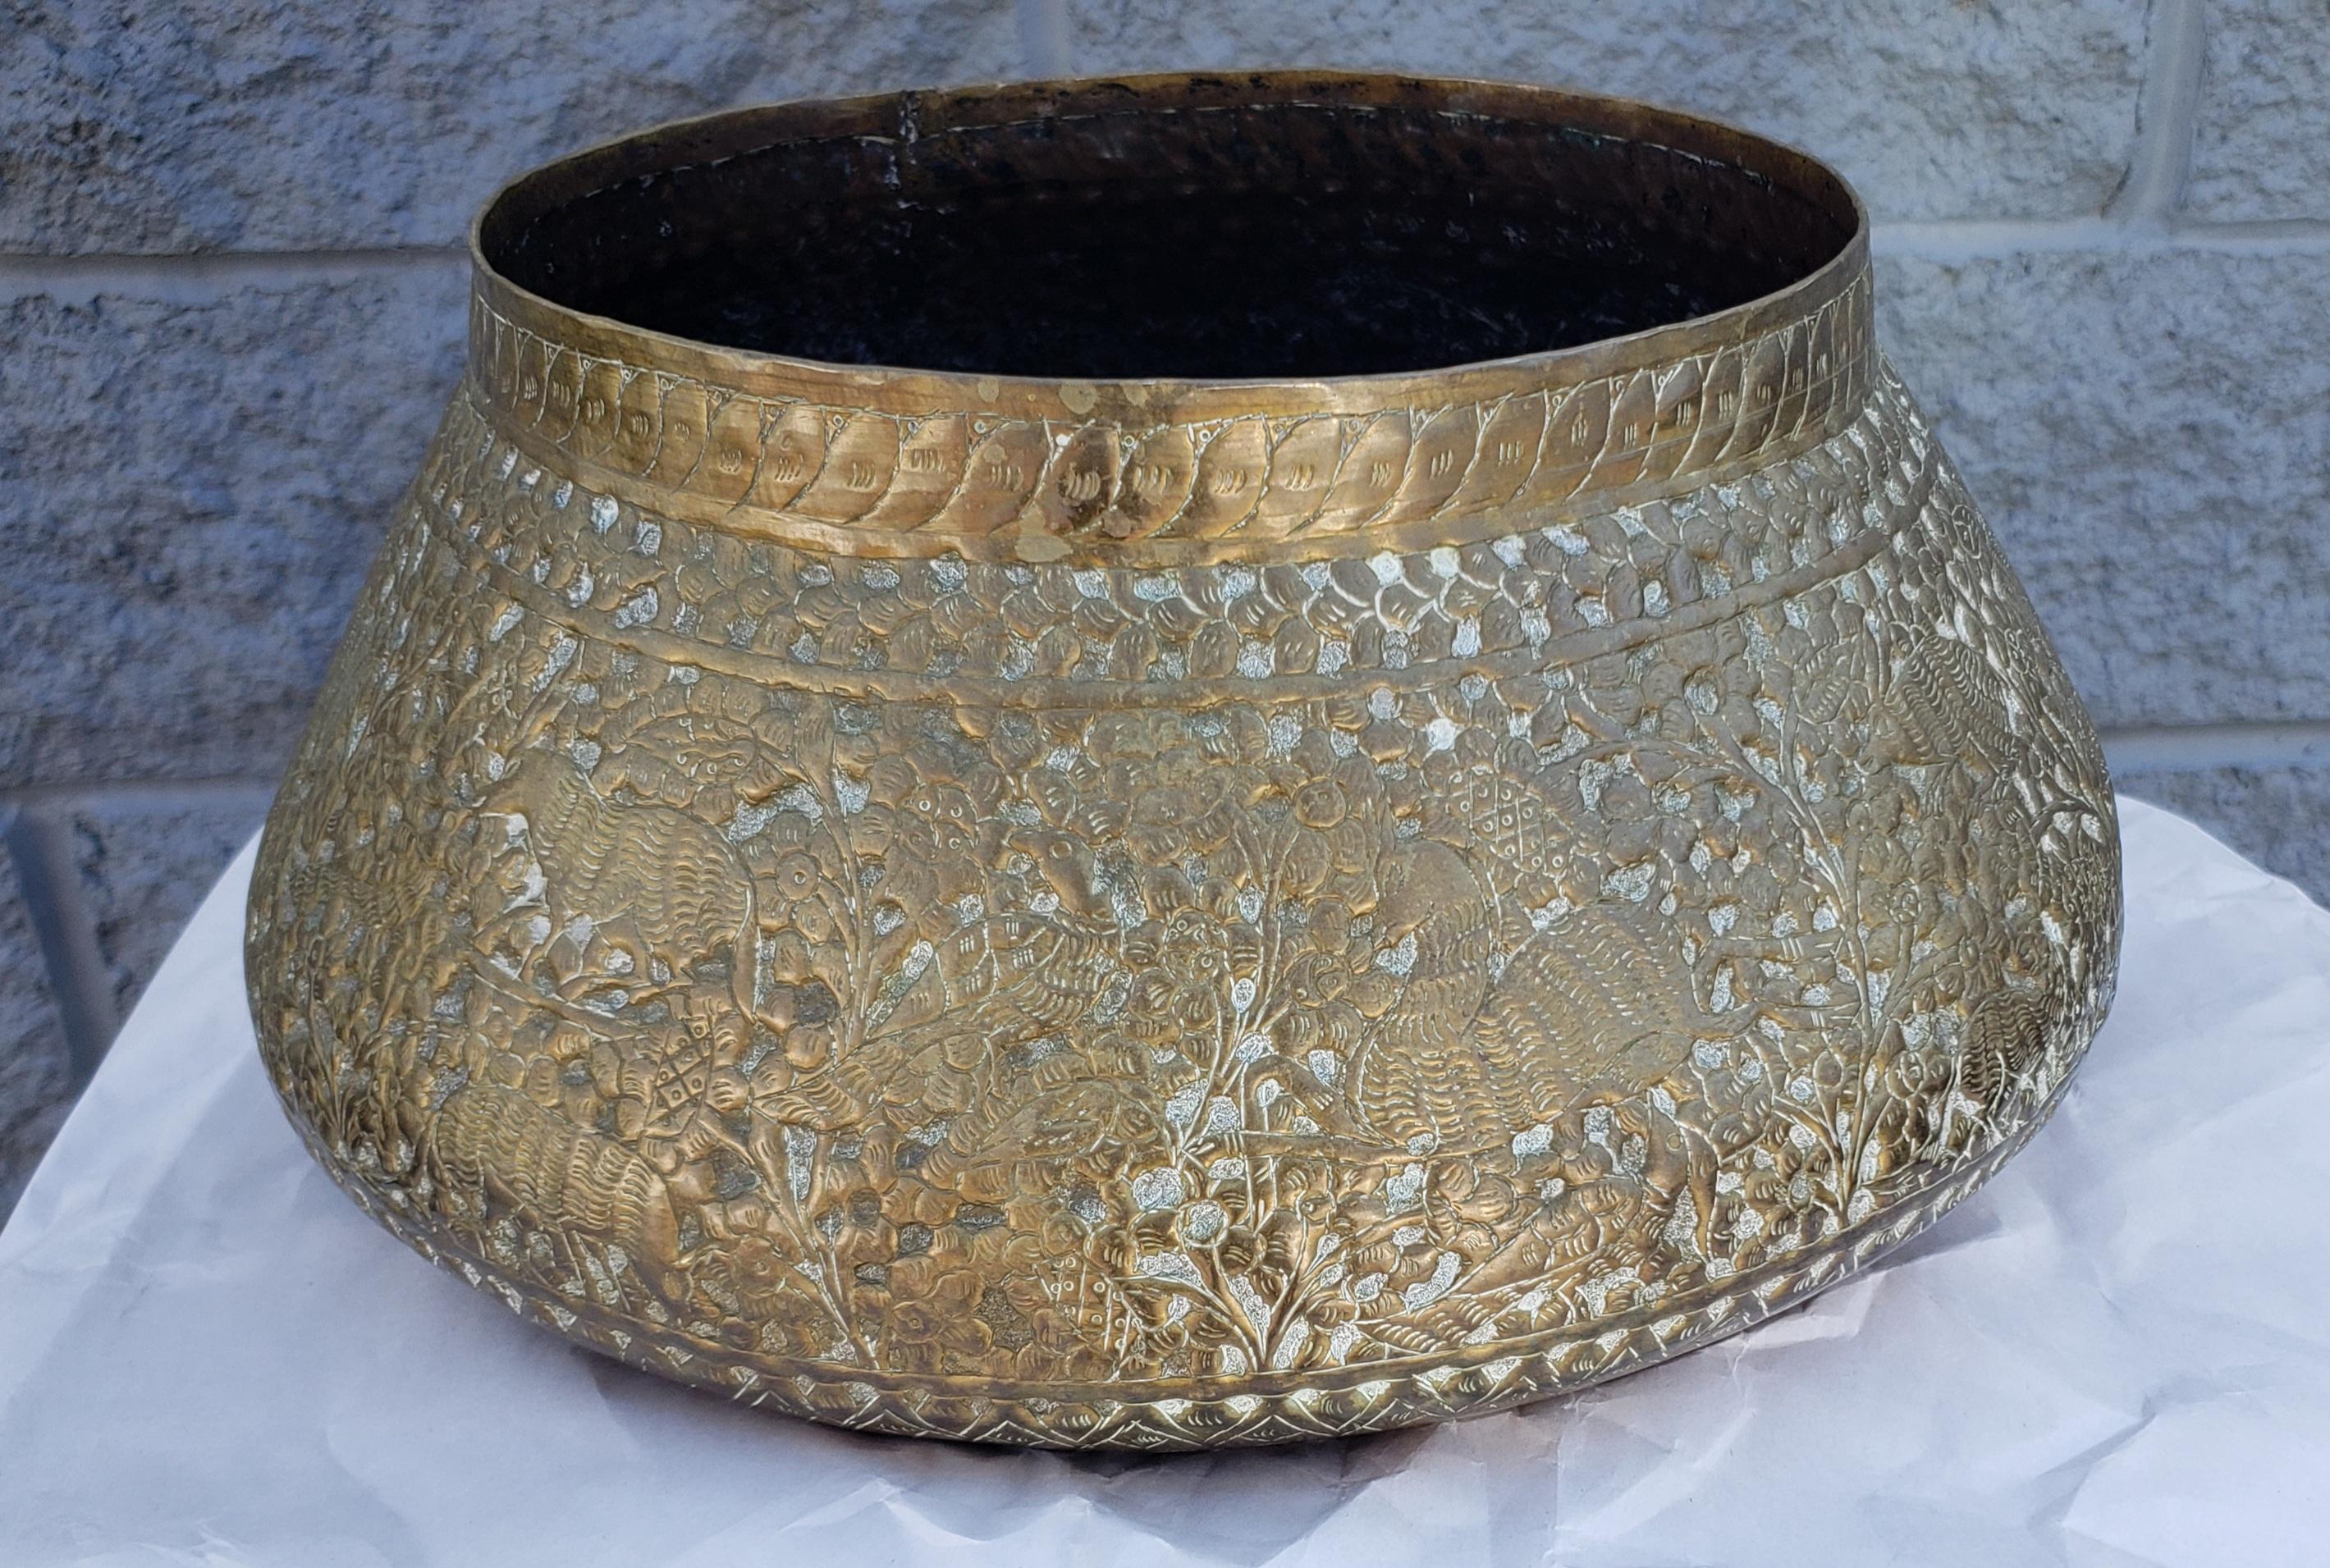 Indian Repoussé & Engraved Brass Bowl / Planter on Engraved Brass Stand / Stool In Good Condition For Sale In Germantown, MD